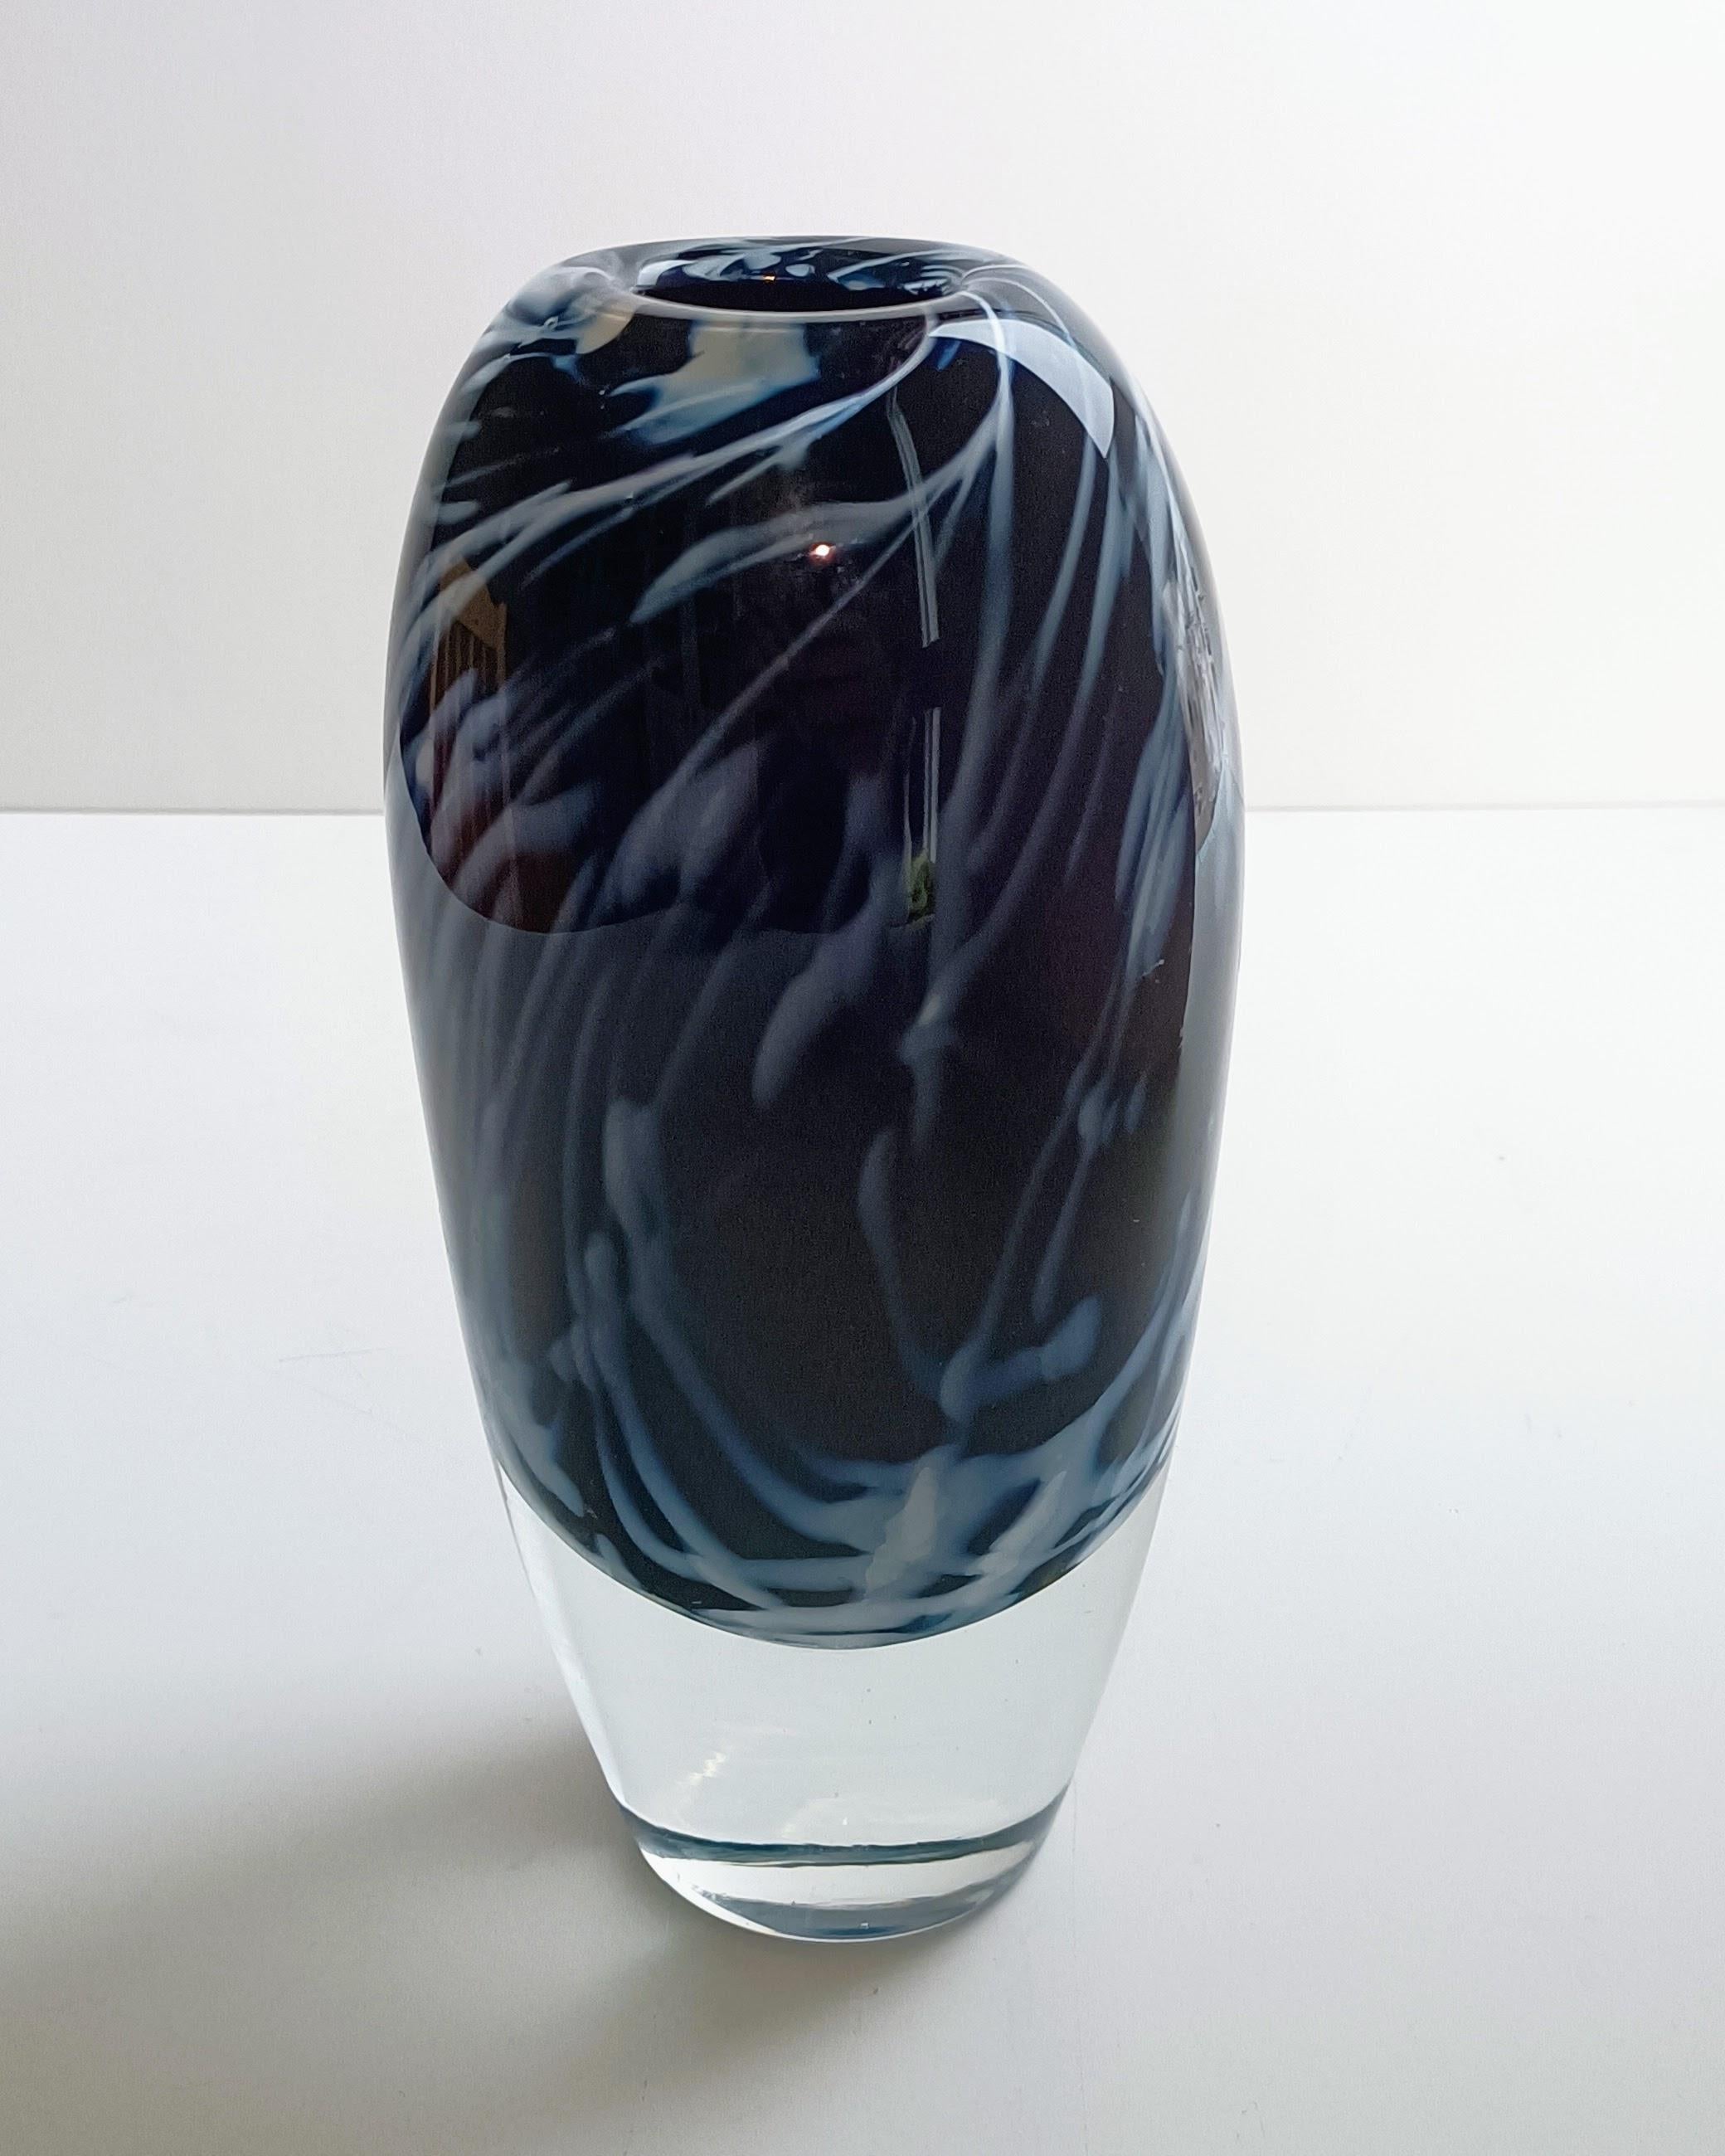 Hand-Crafted Scandinavian Modern Art Glass Orrefors by Walter Johansson, Signed and Numbered For Sale